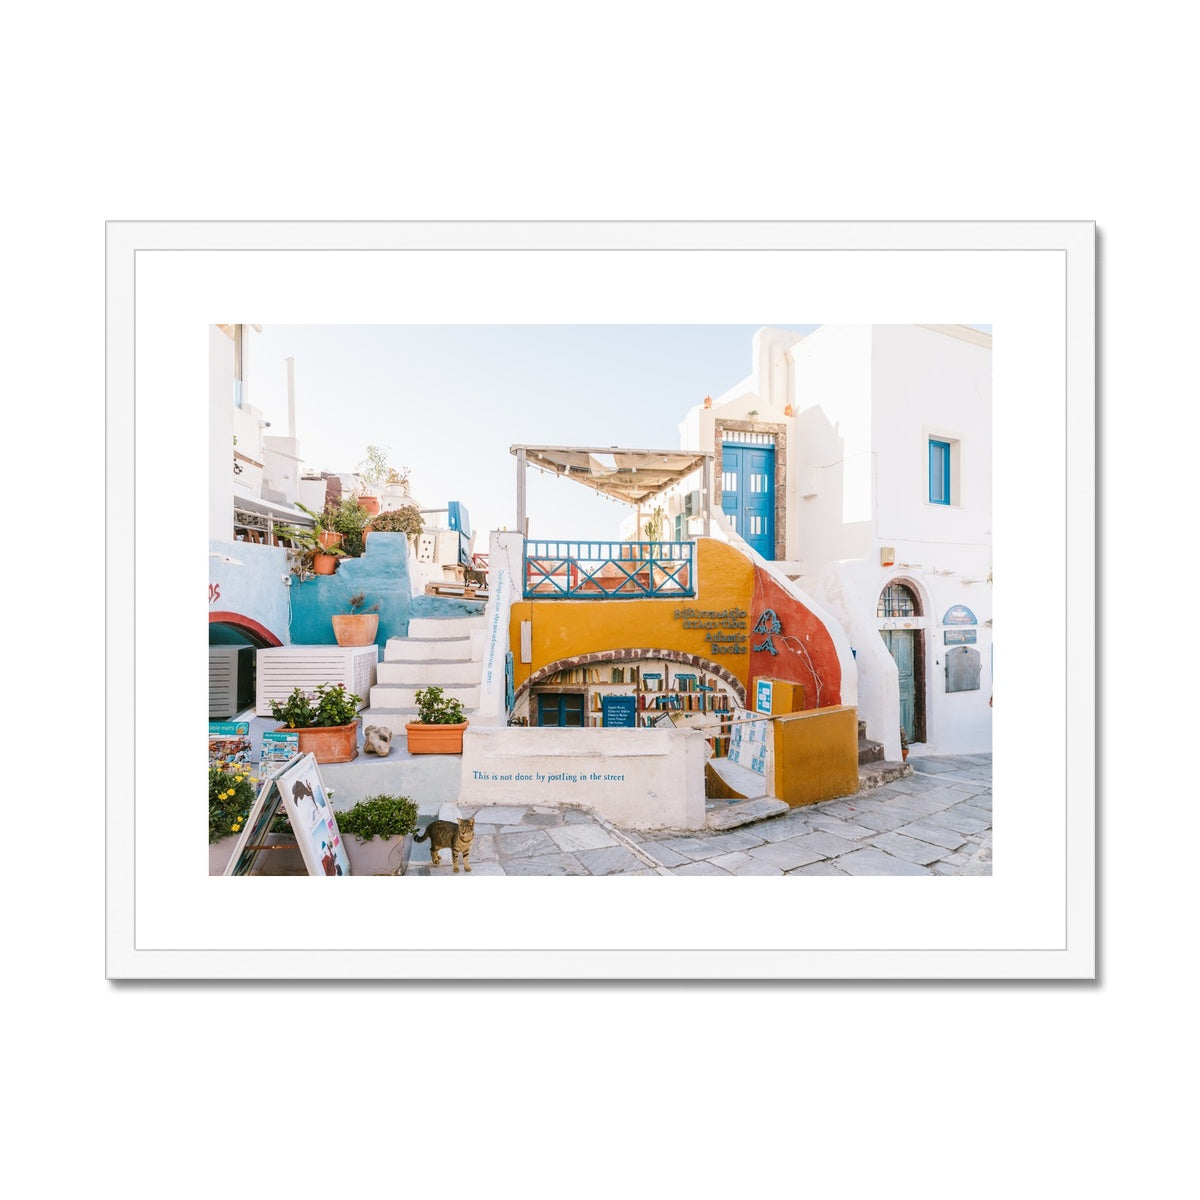 OIA BOOKSTORE Framed & Mounted Print